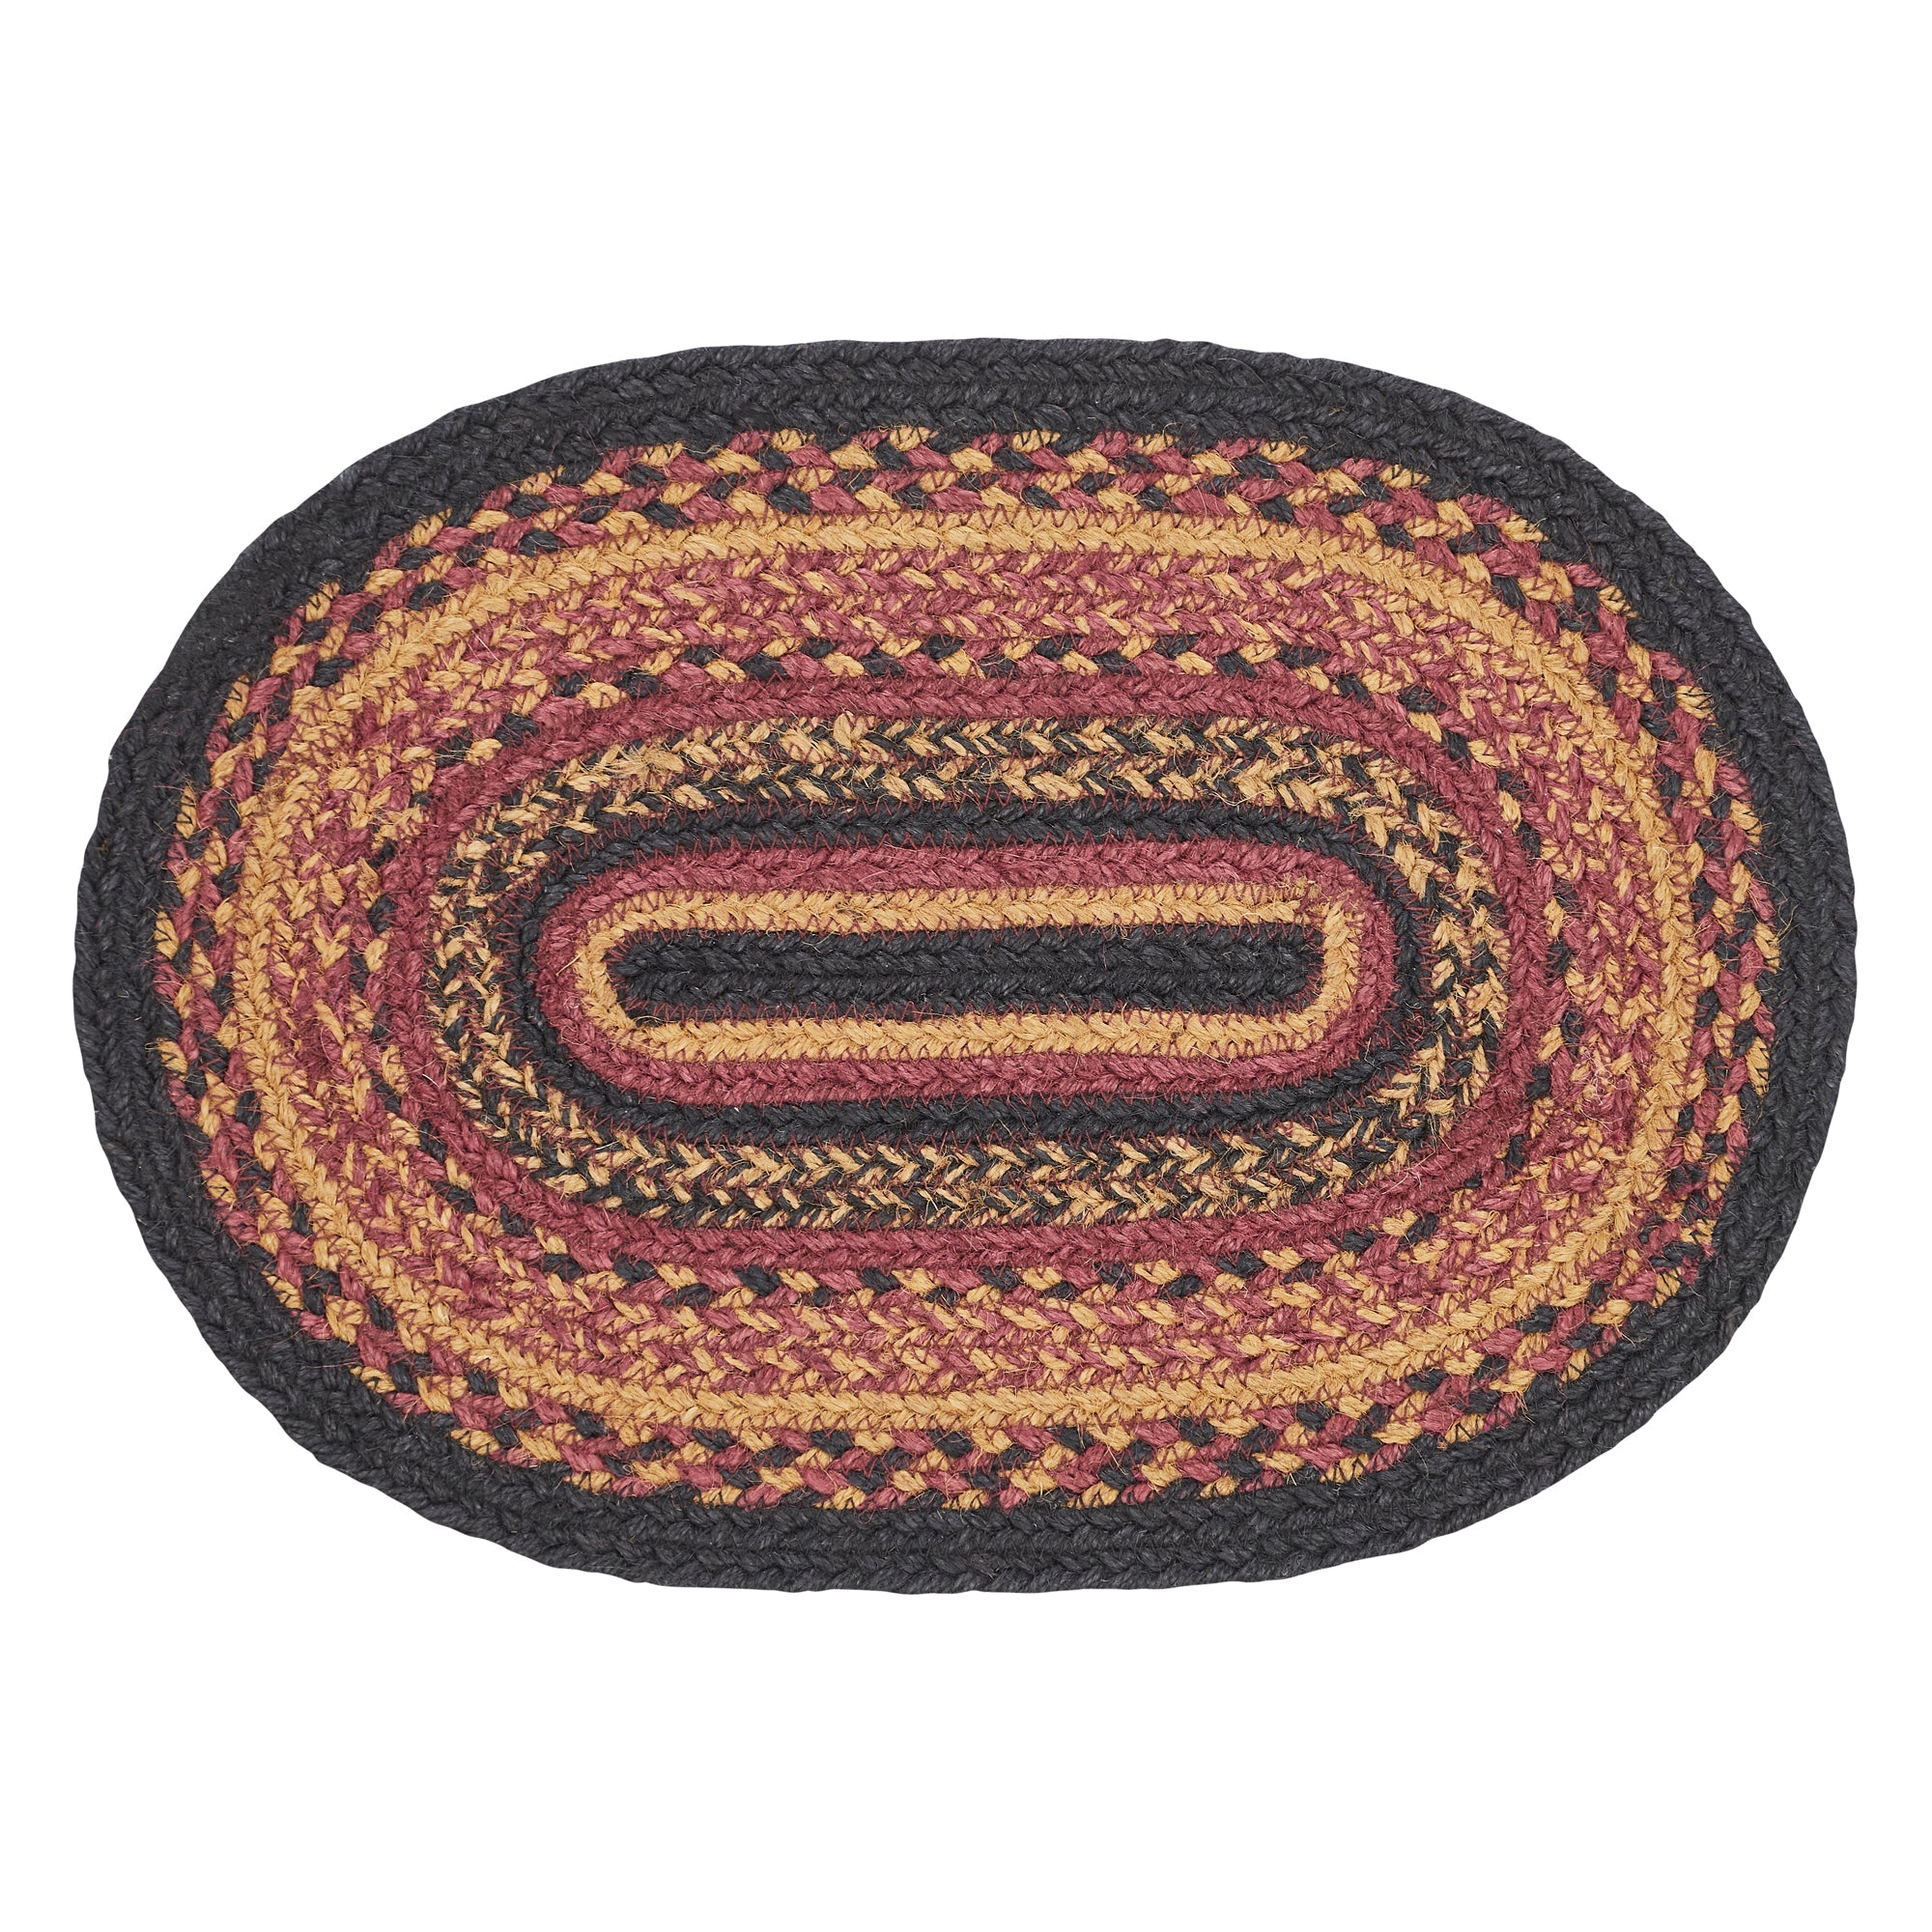 Heritage Farms Jute Oval Placemat 10x15 VHC Brands